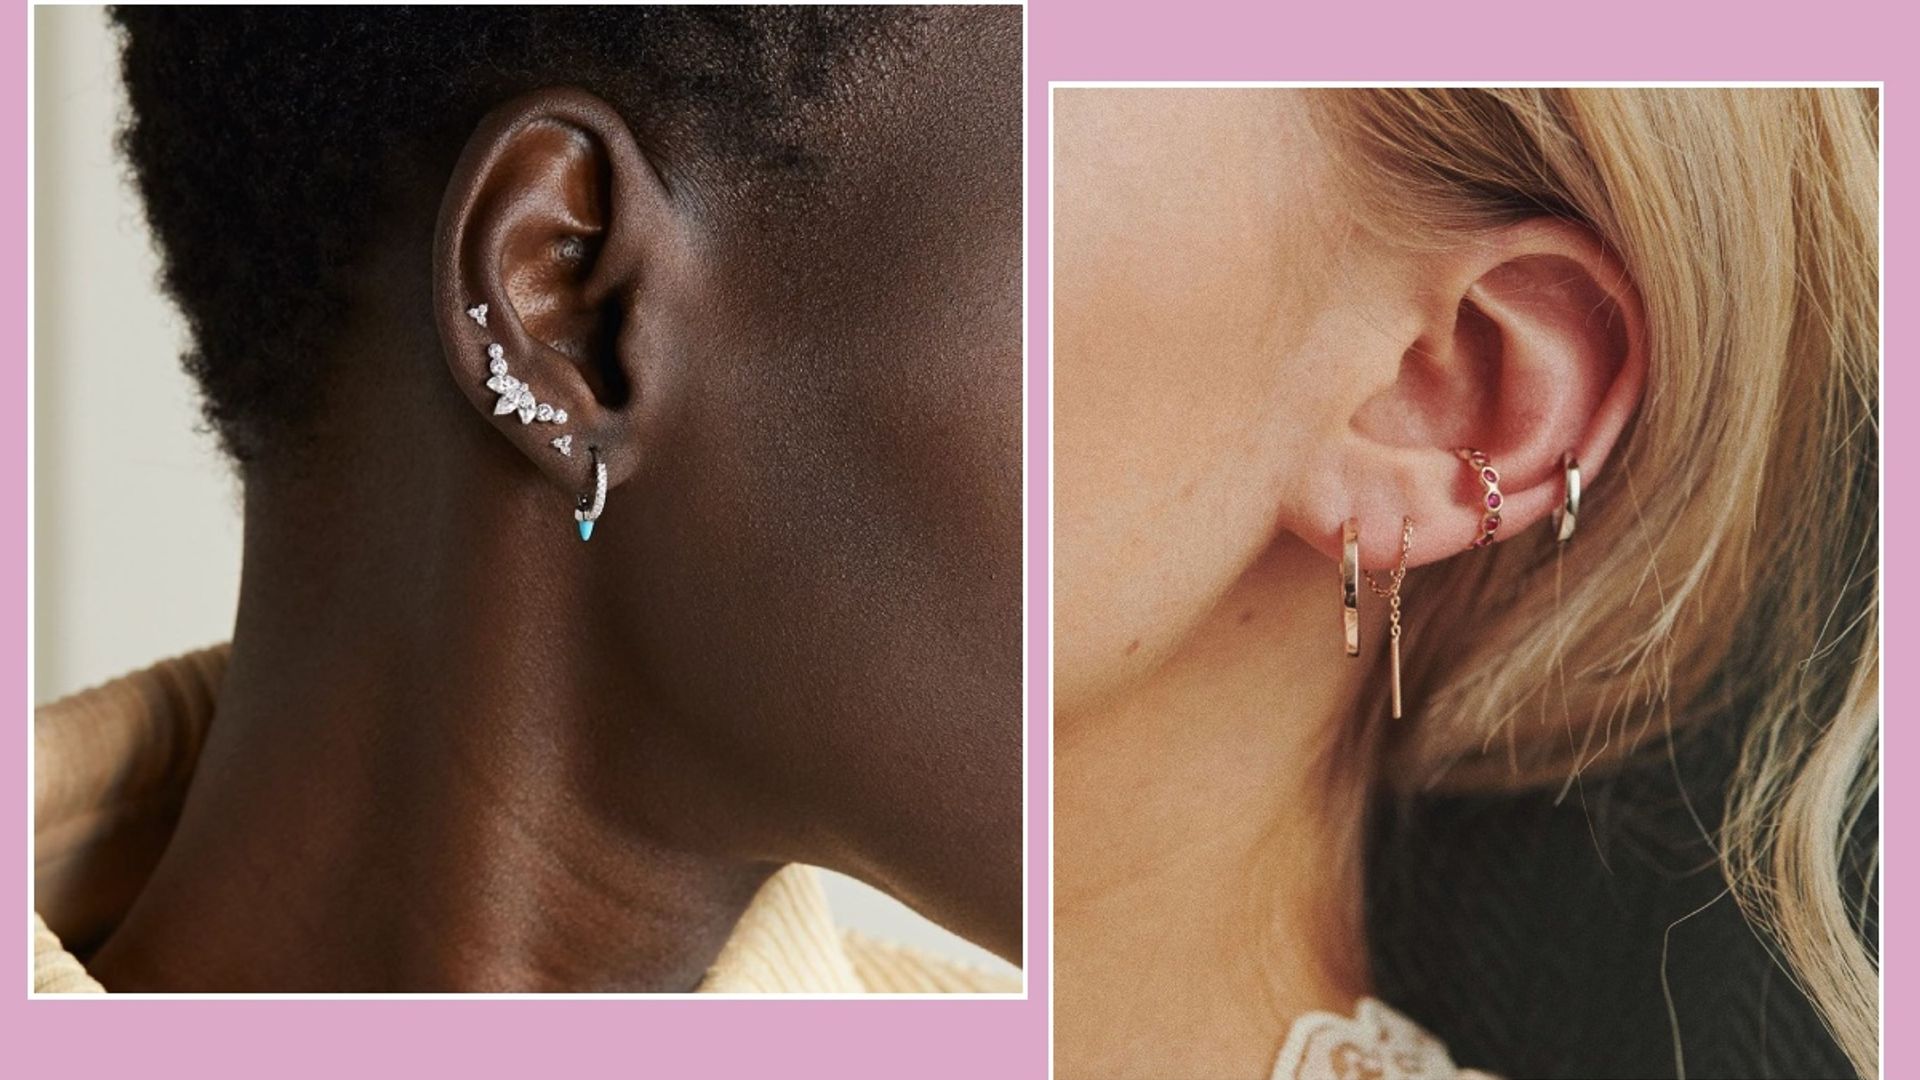 Know Your Ear Jewels: 8 Most Popular Types of Earrings